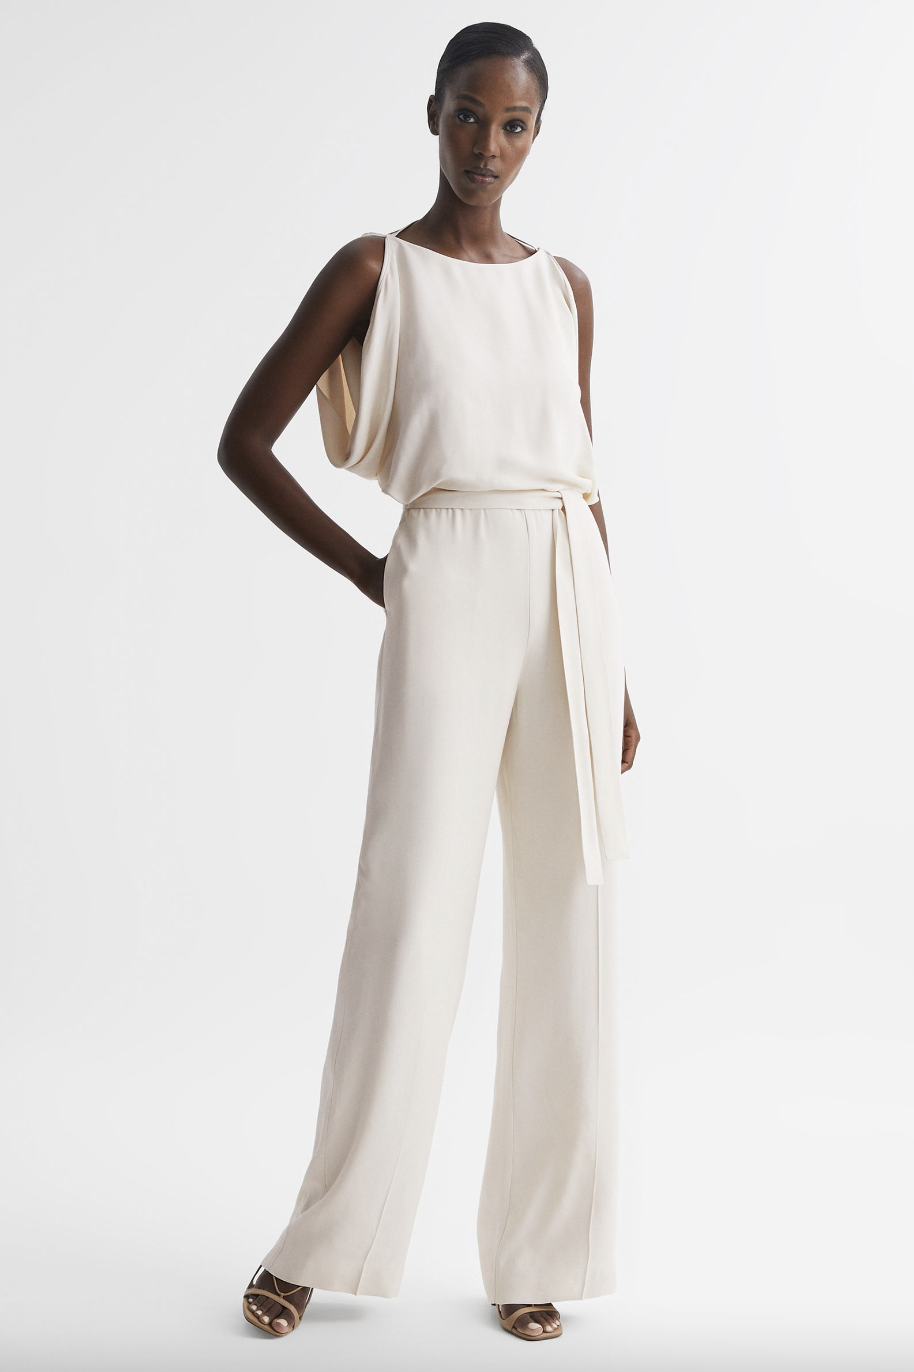 White Bridal Jumpsuits For Every Wedding Or Pre-Wedding Event